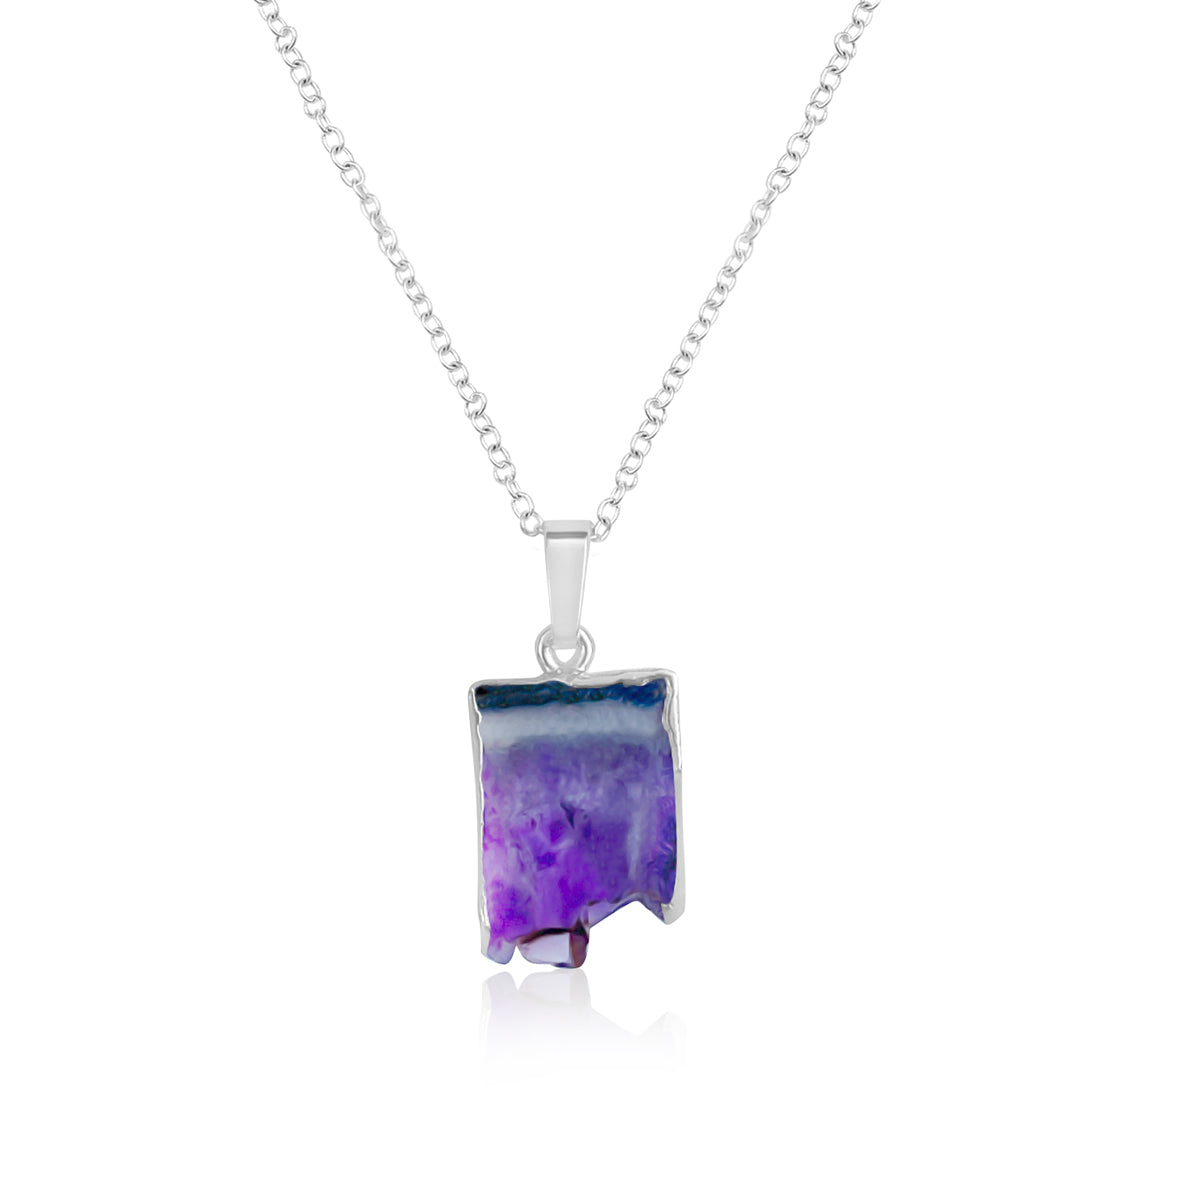 Integrity's Light is a beautiful and meaningful Amethyst Necklace that embodies the qualities of strength, wisdom, and inner peace.    Amethyst is a powerful and protective stone that promotes emotional stability and inner strength, while its natural tranquility and calming properties help to dispel negativity and promote spiritual awareness